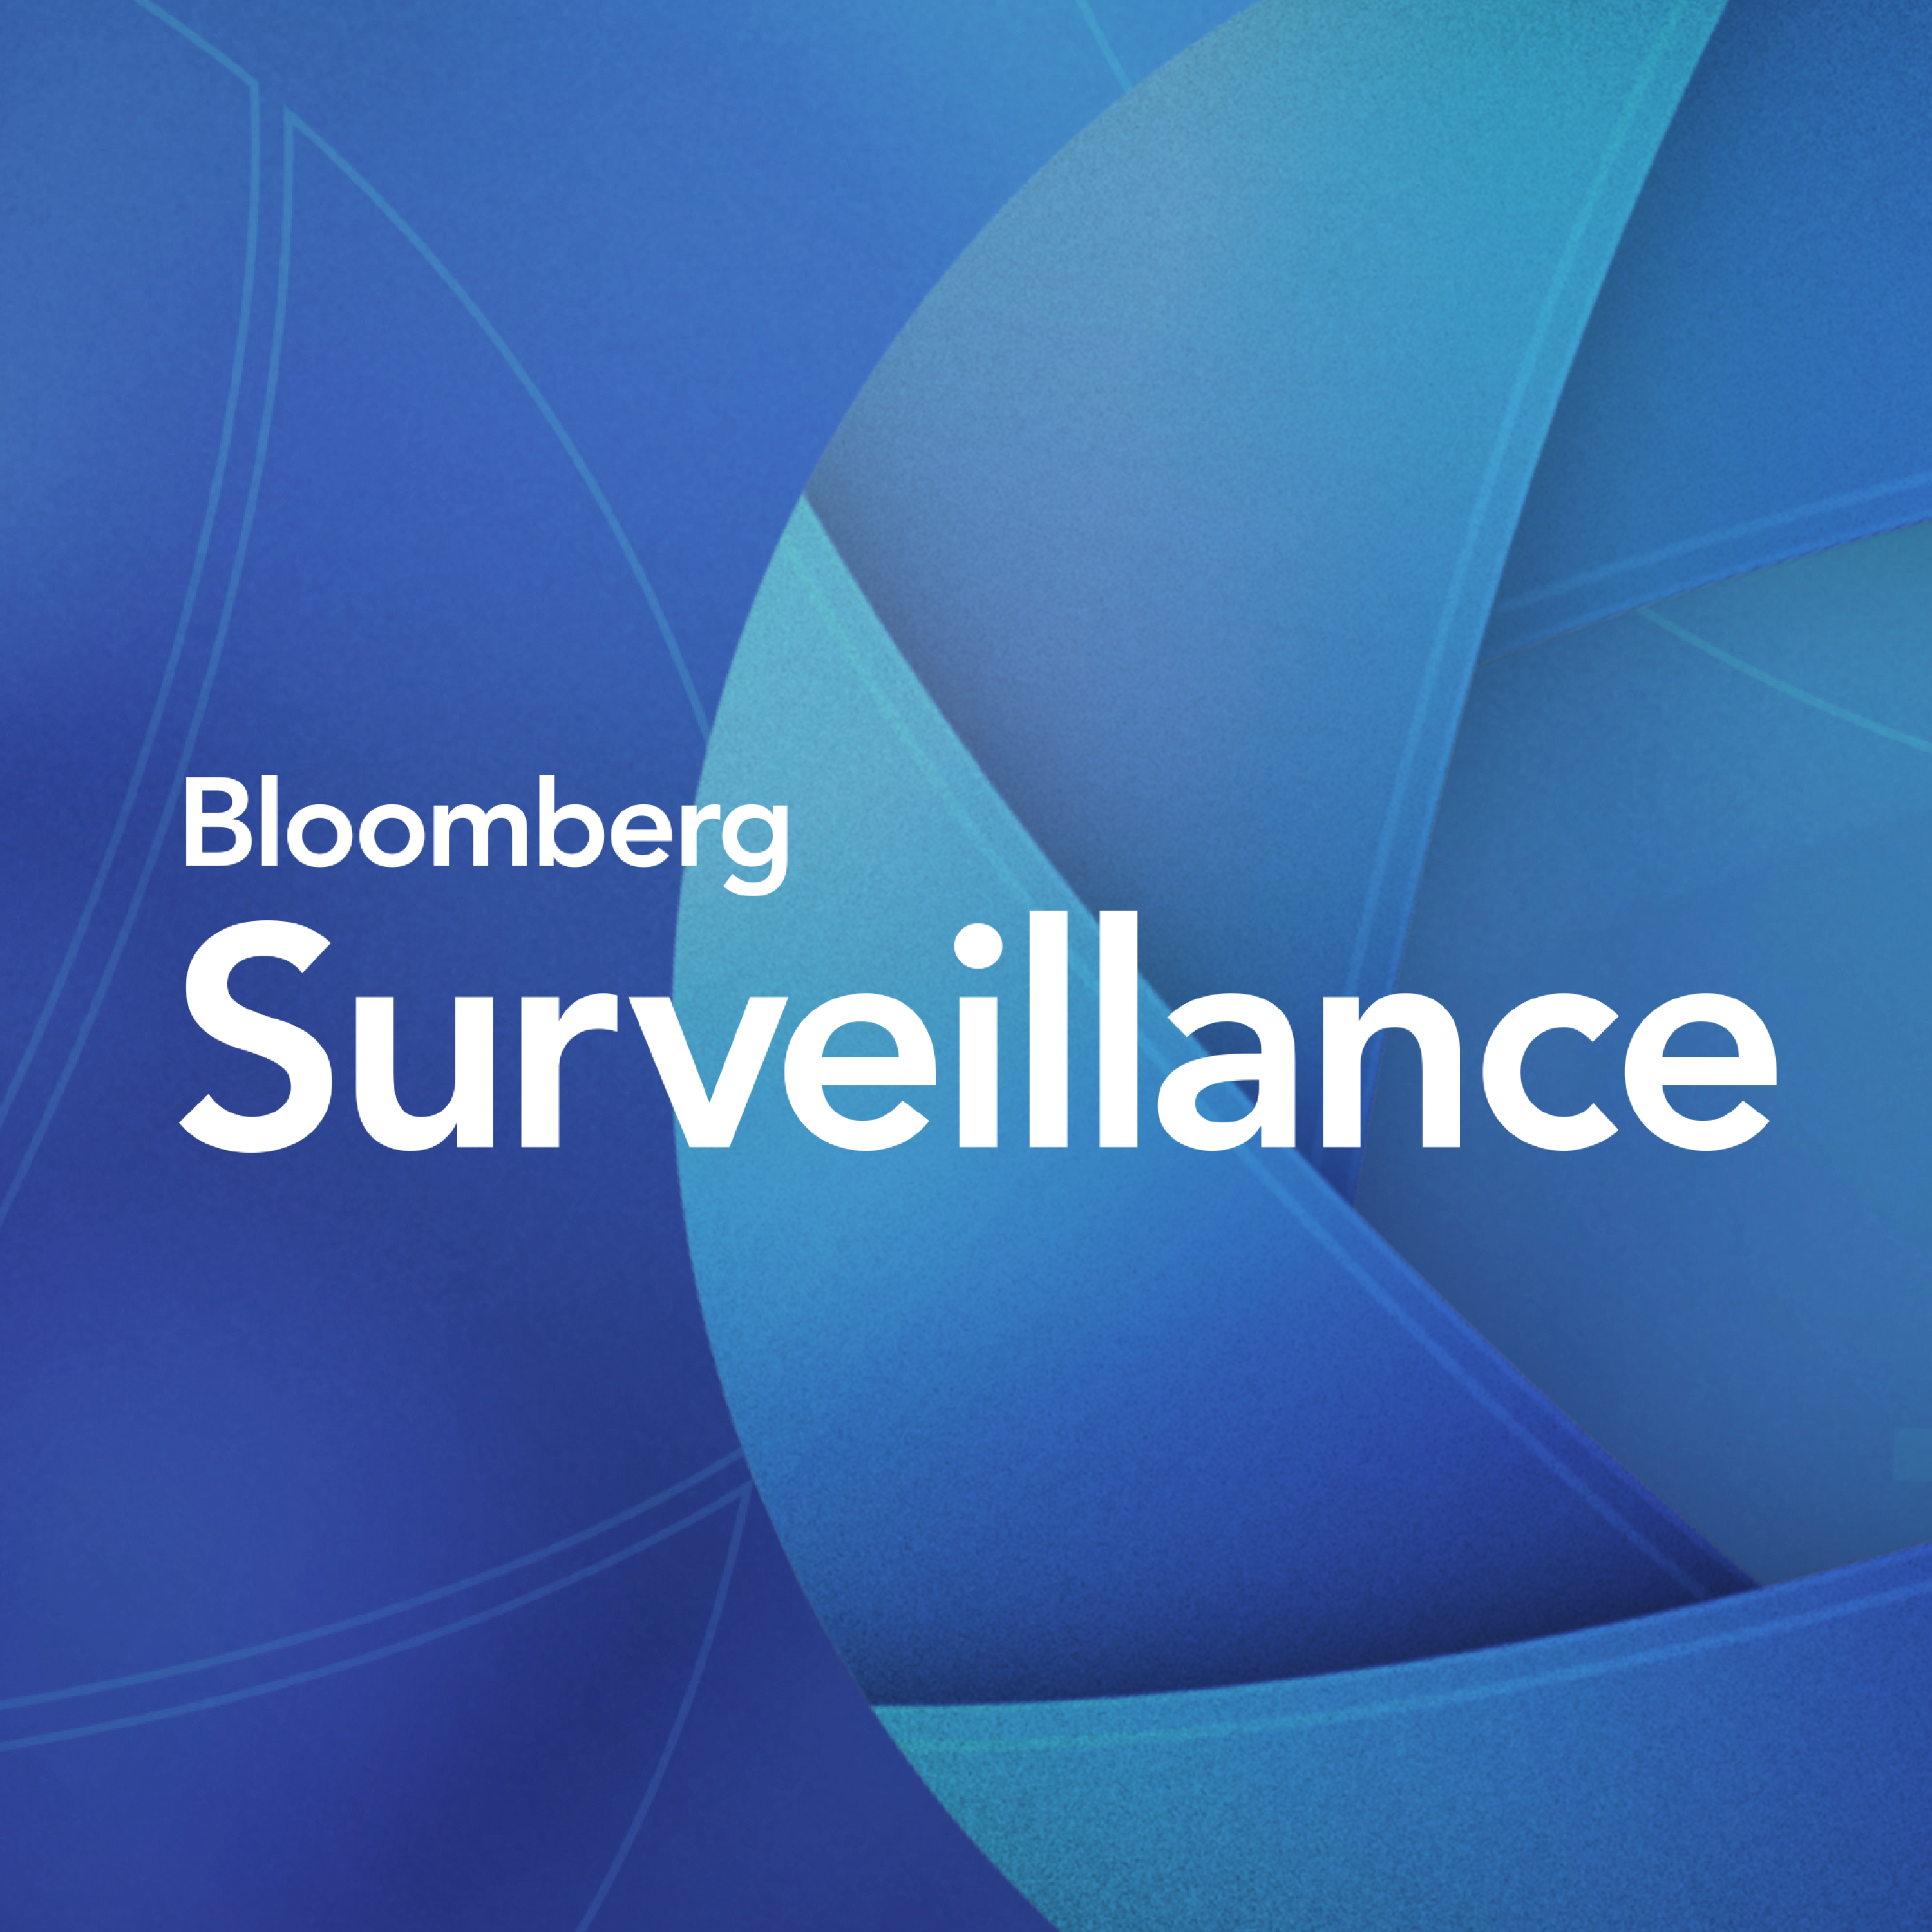 Surveillance: Global Growth At Center Stage In Davos Day Two